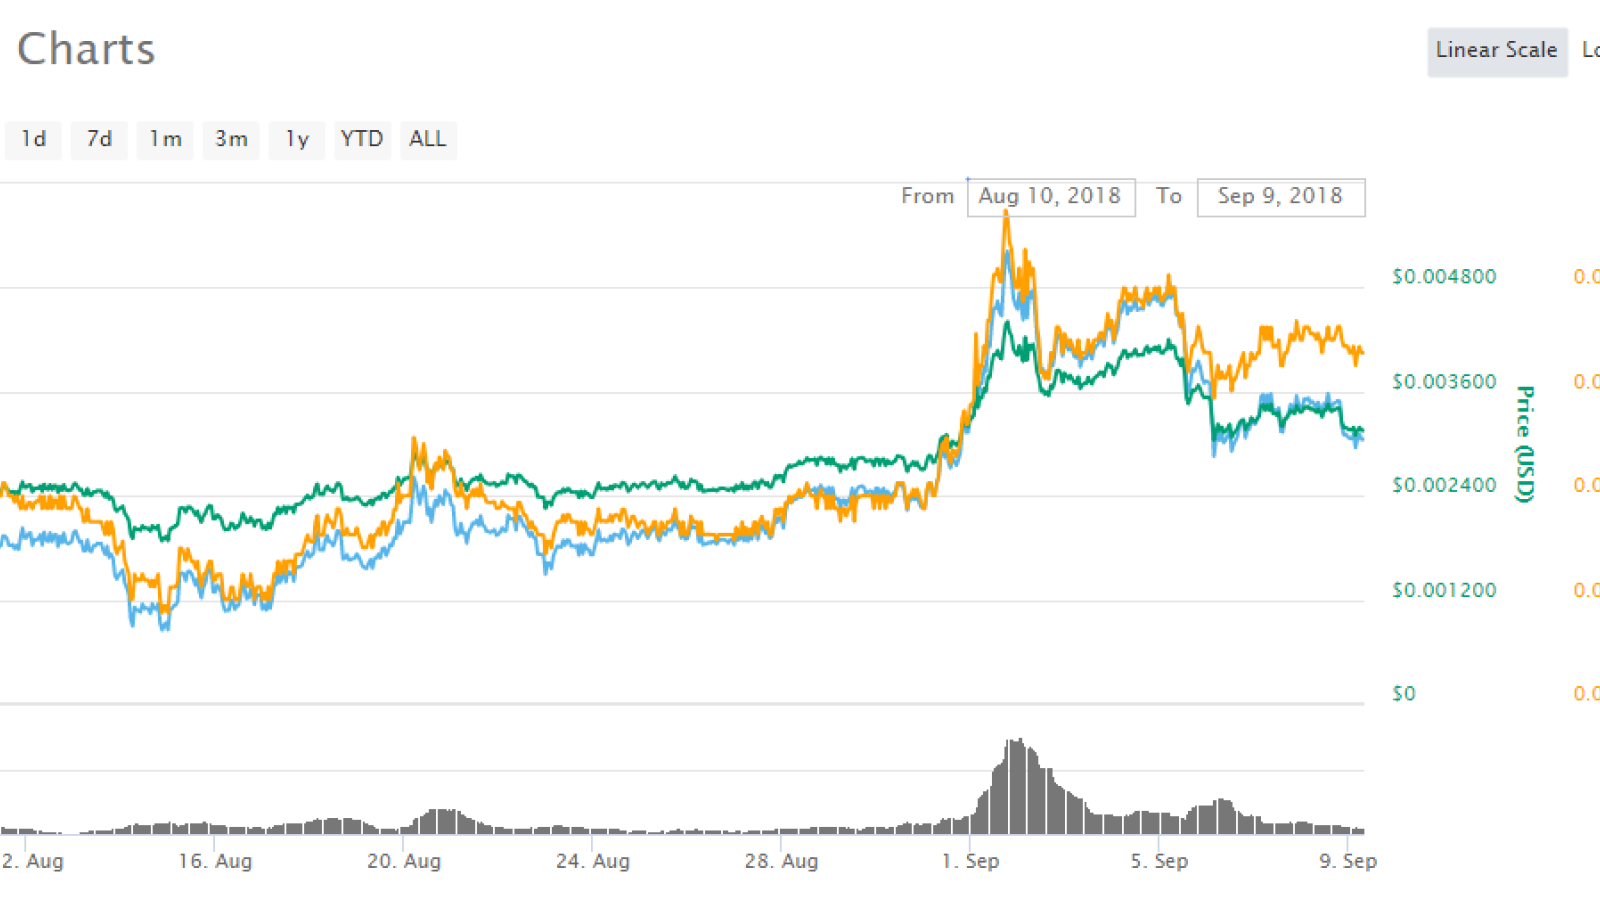 This August was stable for RDD while September started with a bull run